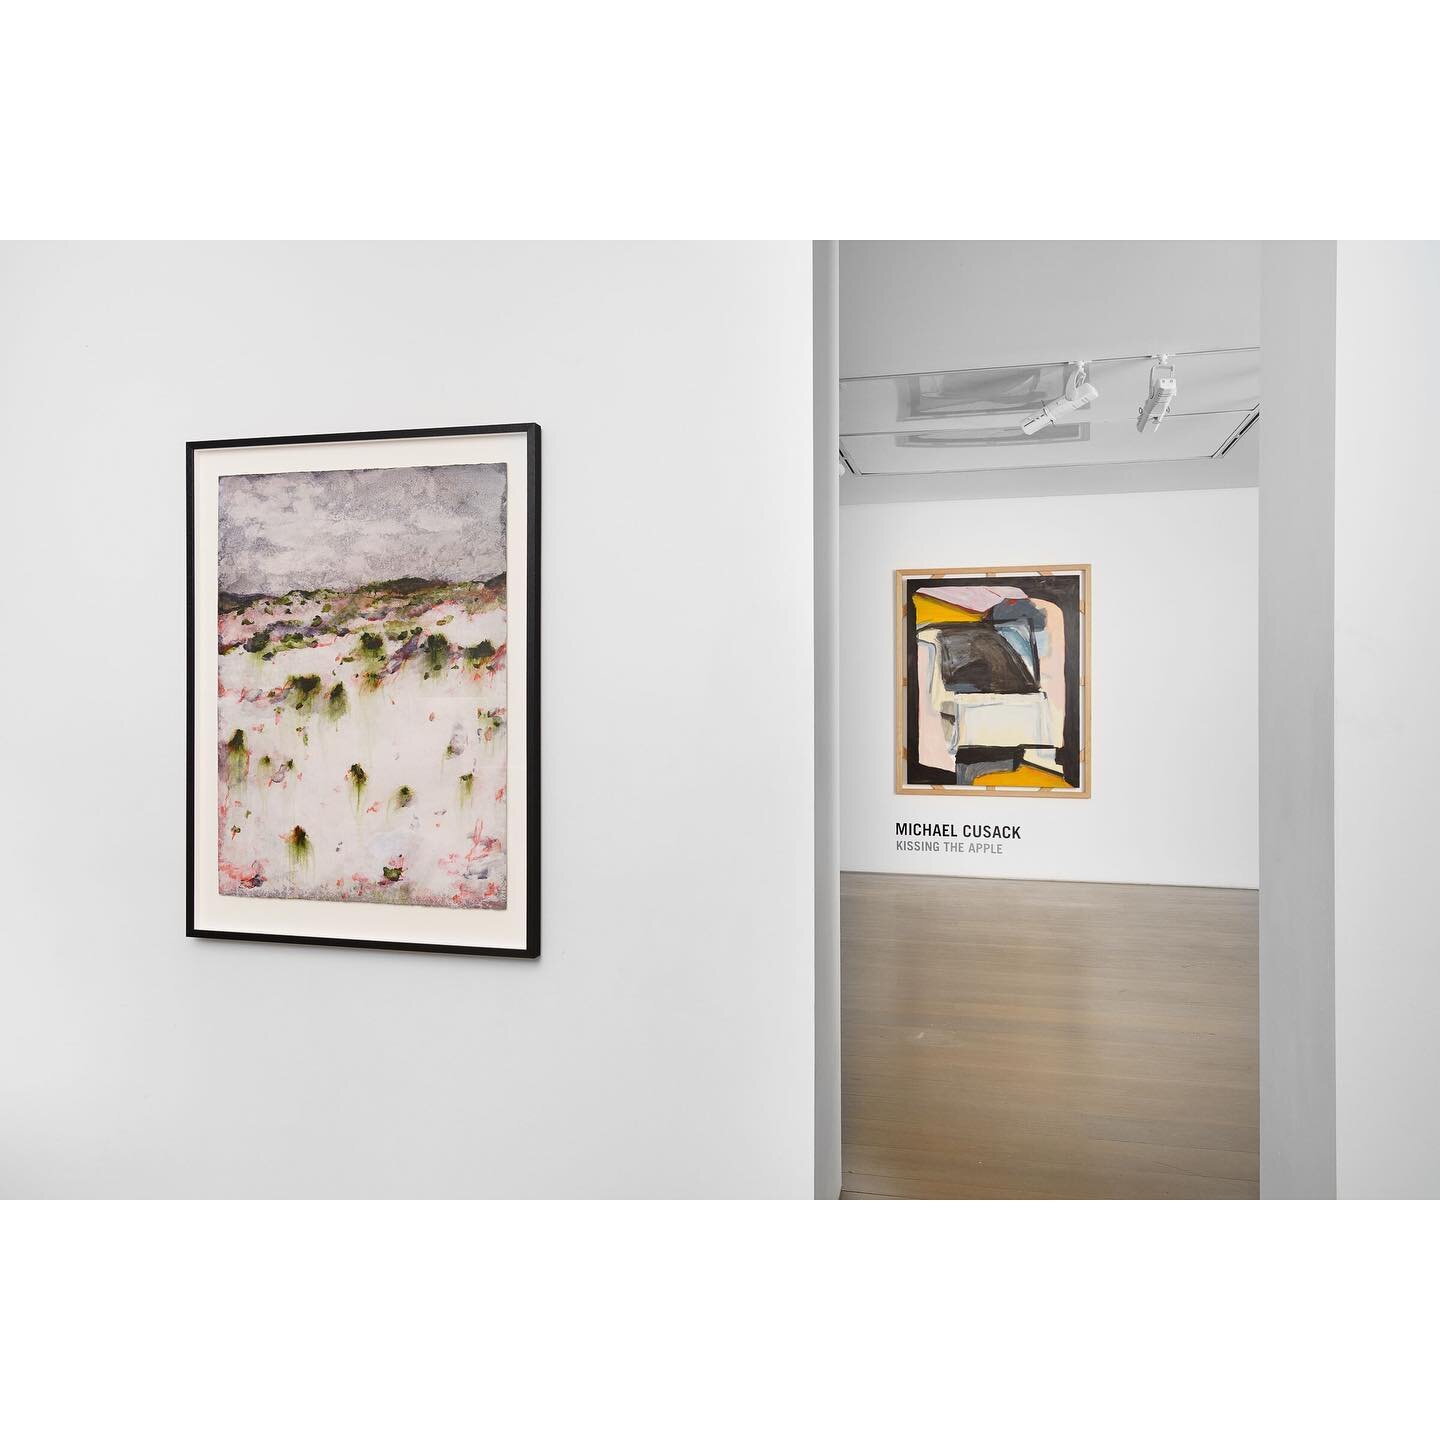 Final day to see TIM SUMMERTON and MICHAEL CUSACK exhibitions. Gallery open today 10-5. 

Photography @docqment 
@cusack2 @olsen_gallery @olsengallerynyc